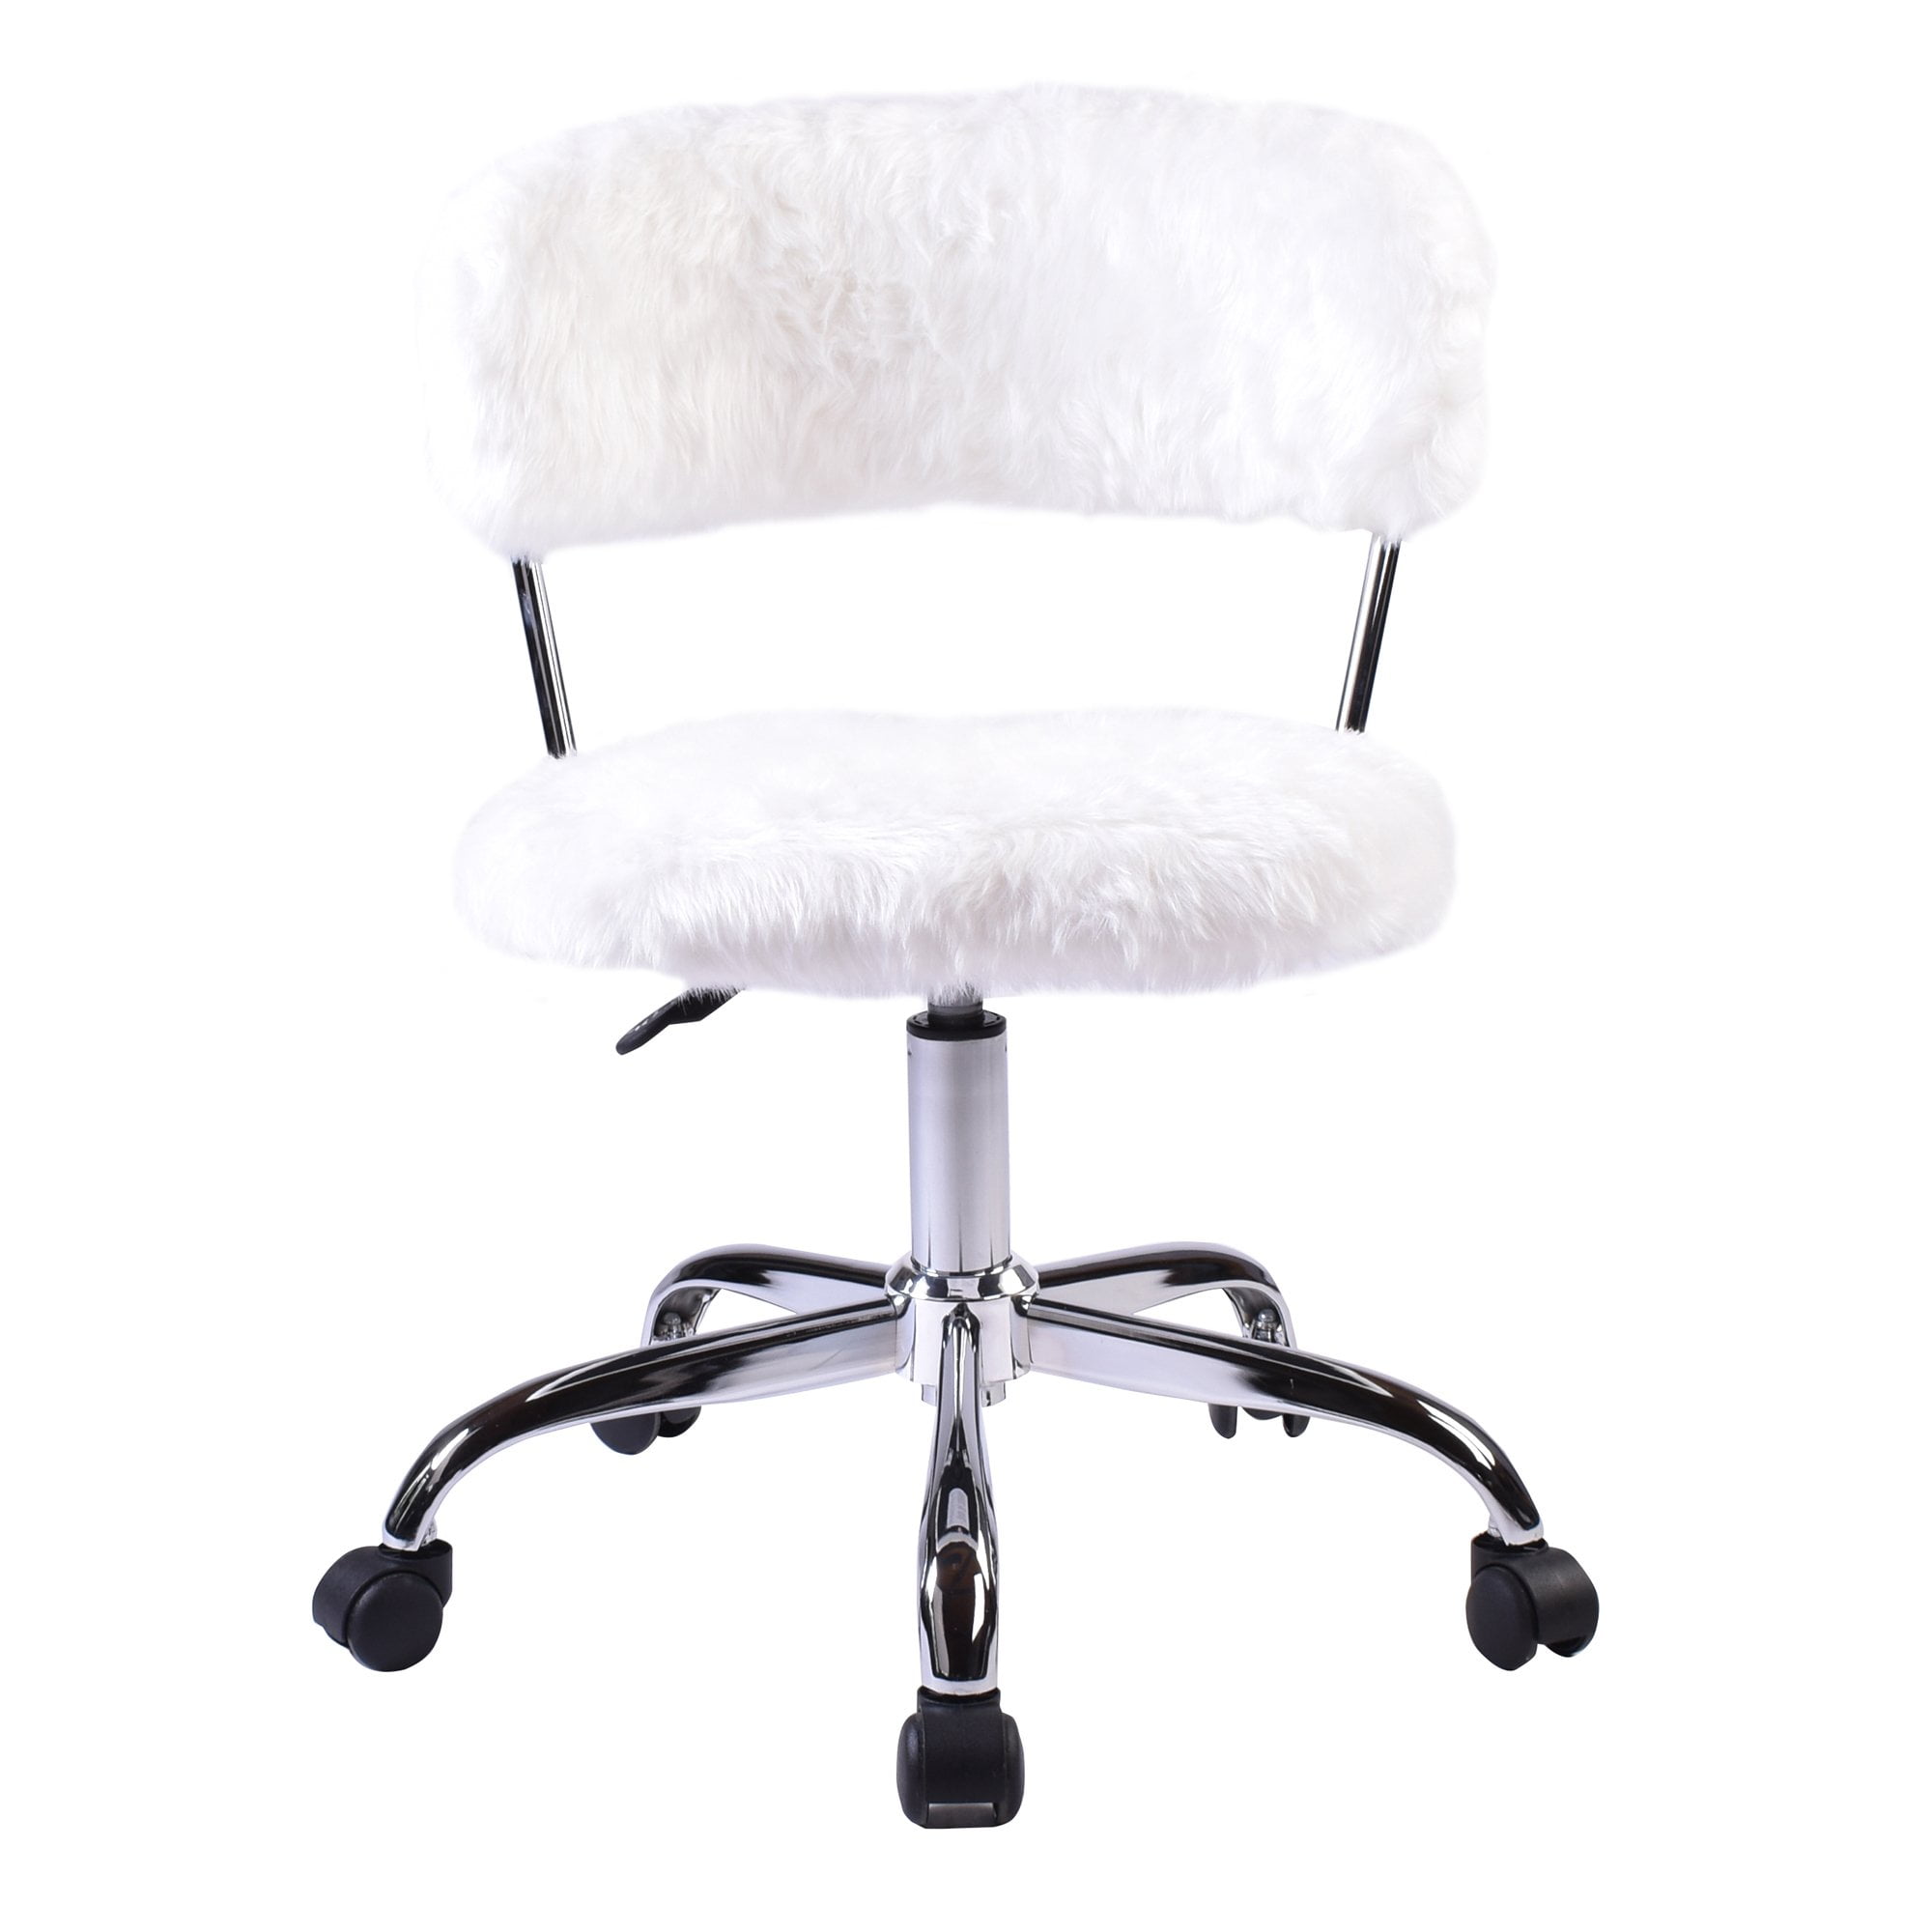 Details about   Adjustable Computer Desk Chair Office Executive Task Vanity Swivel Chair Wheels 